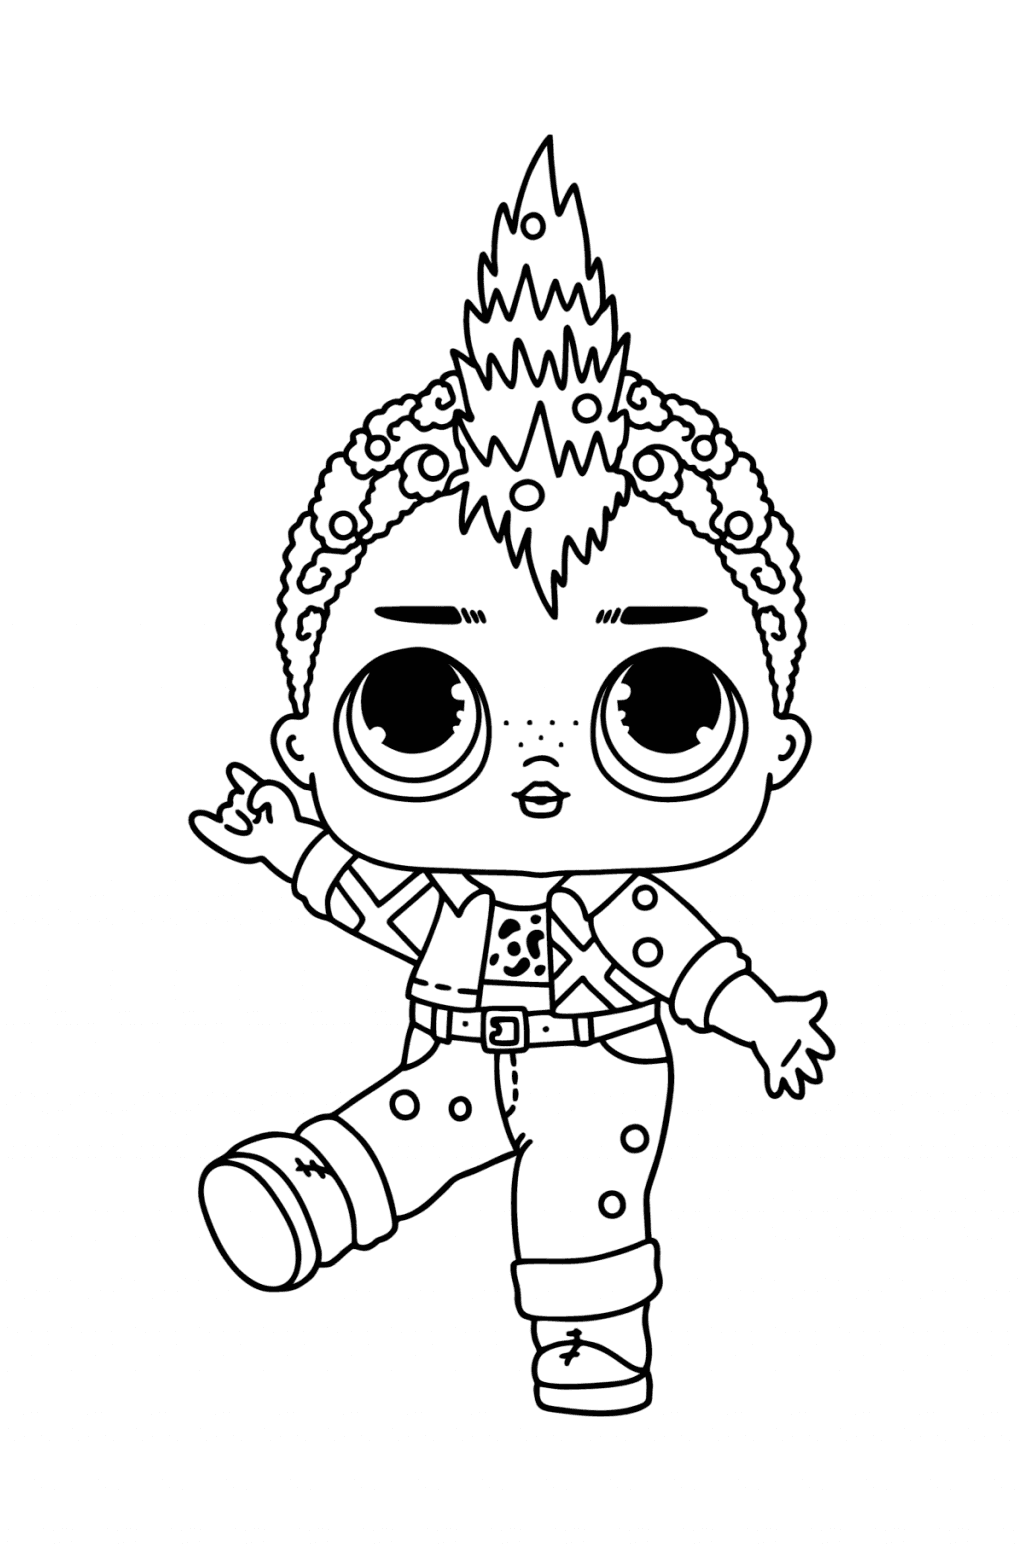 Colouring page LOL Surprise Punk Boi - Online and Print for Free!